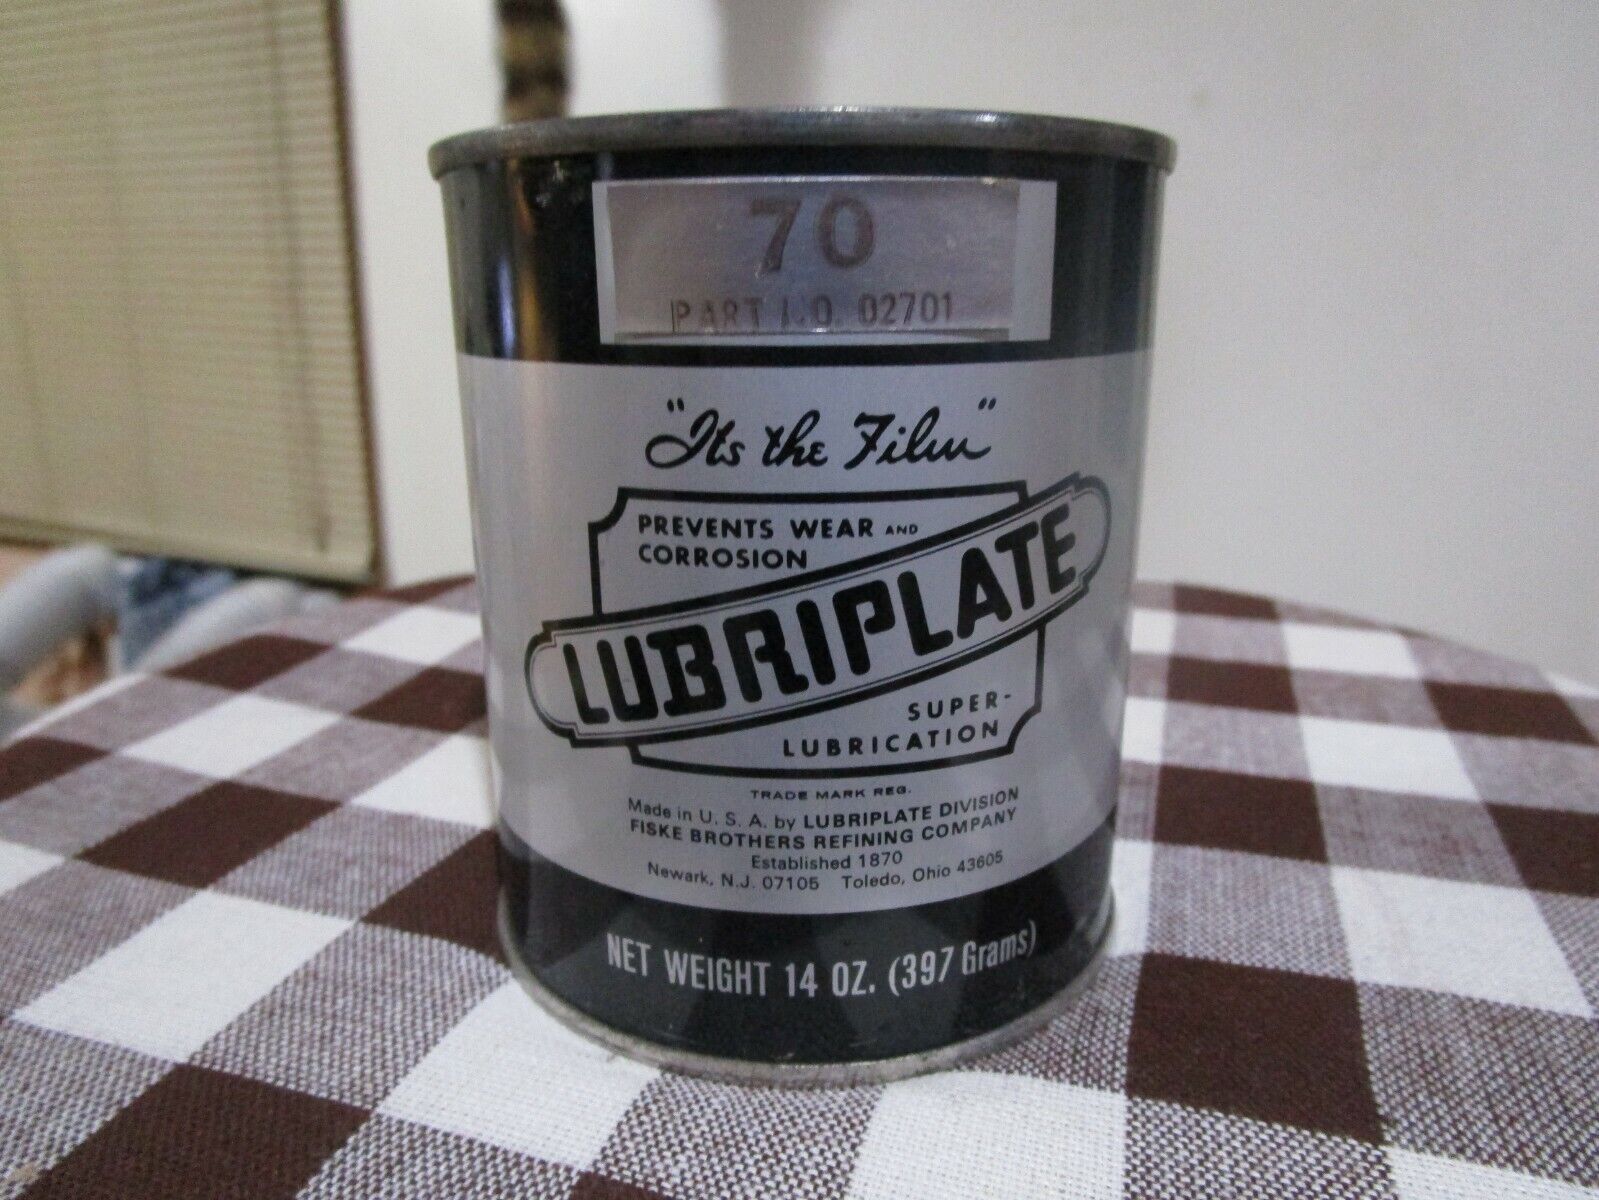 14 Oz. FULL Tin Can Lubriplate 70 Part No. 02701 Super Lubrication Grease